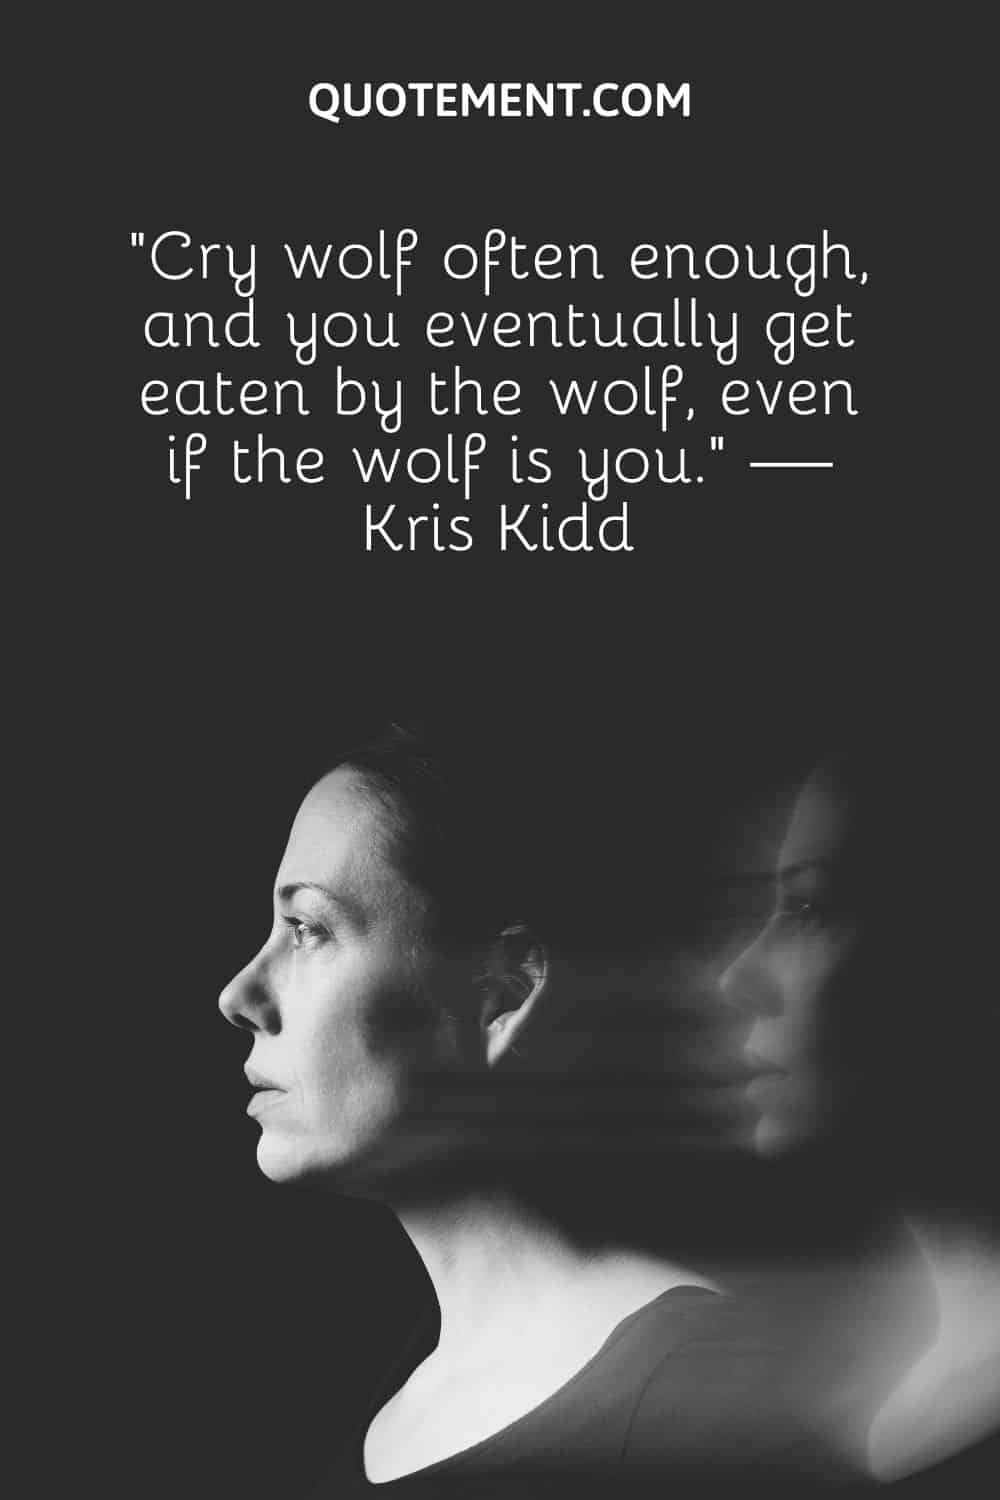 “Cry wolf often enough, and you eventually get eaten by the wolf, even if the wolf is you.” — Kris Kidd